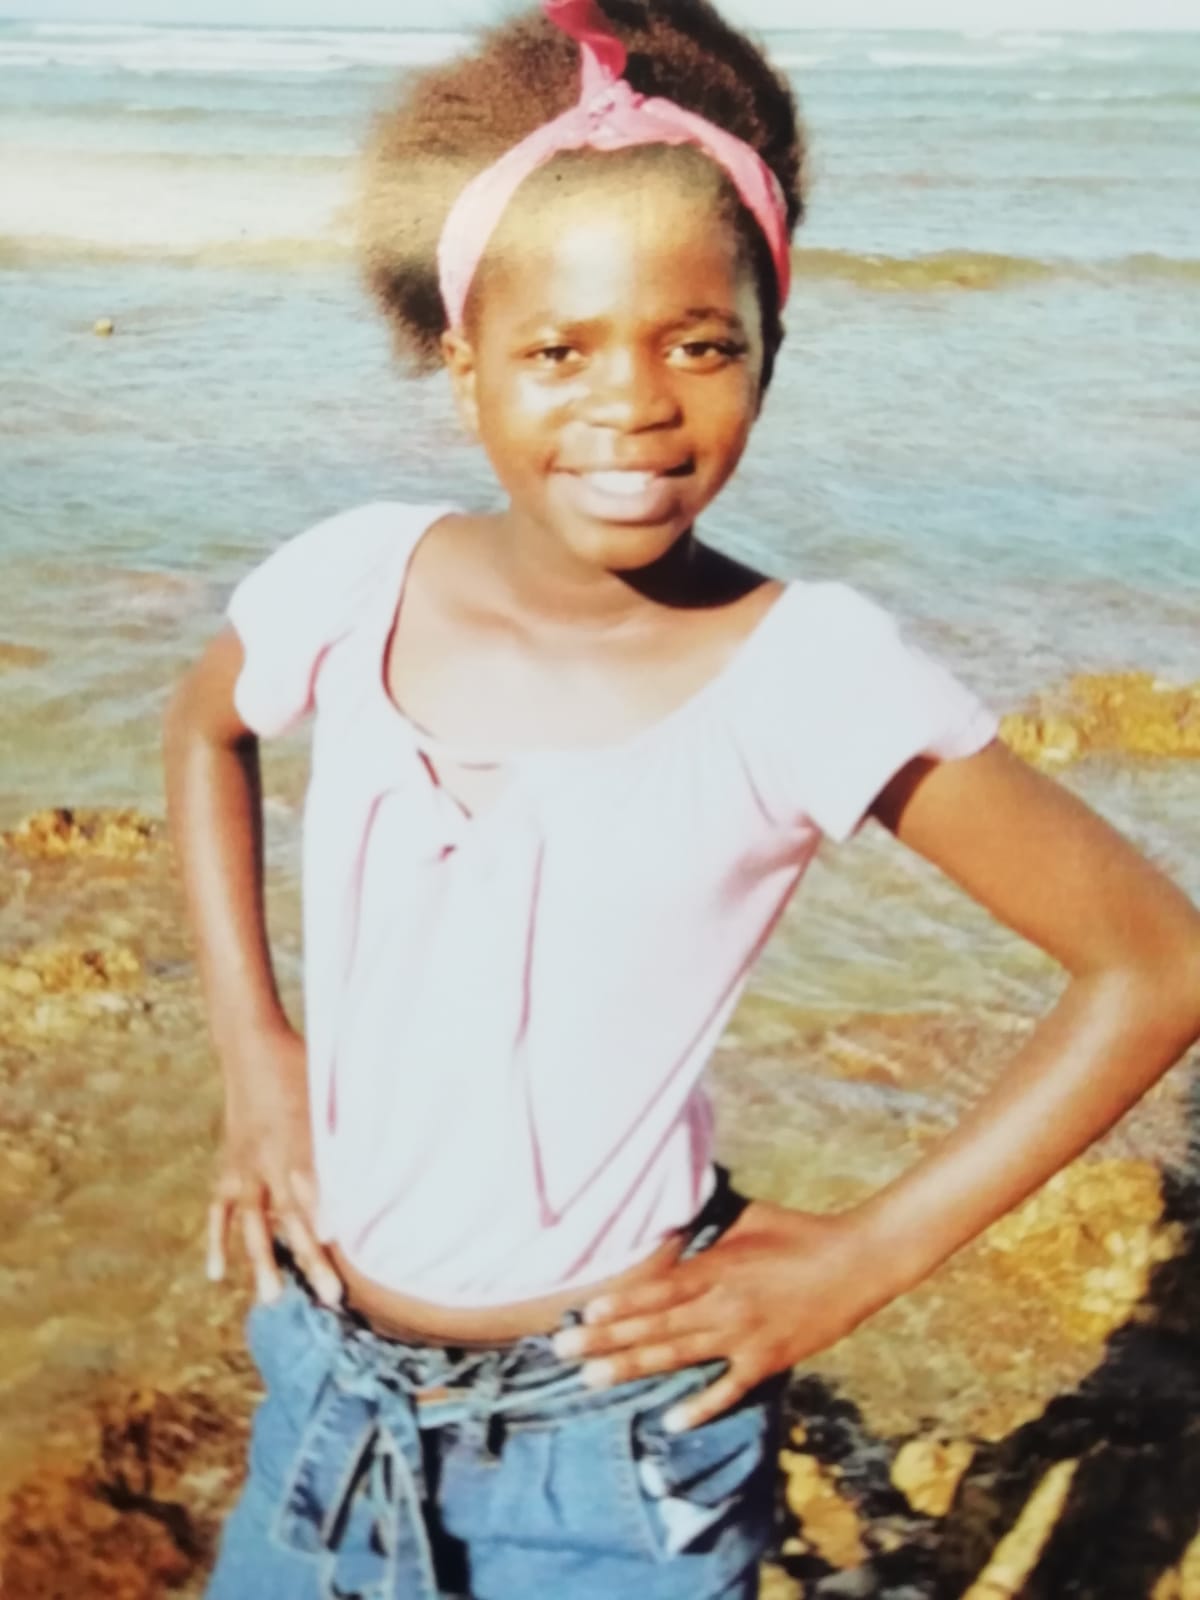 Search for a missing girl in the Eastern Cape